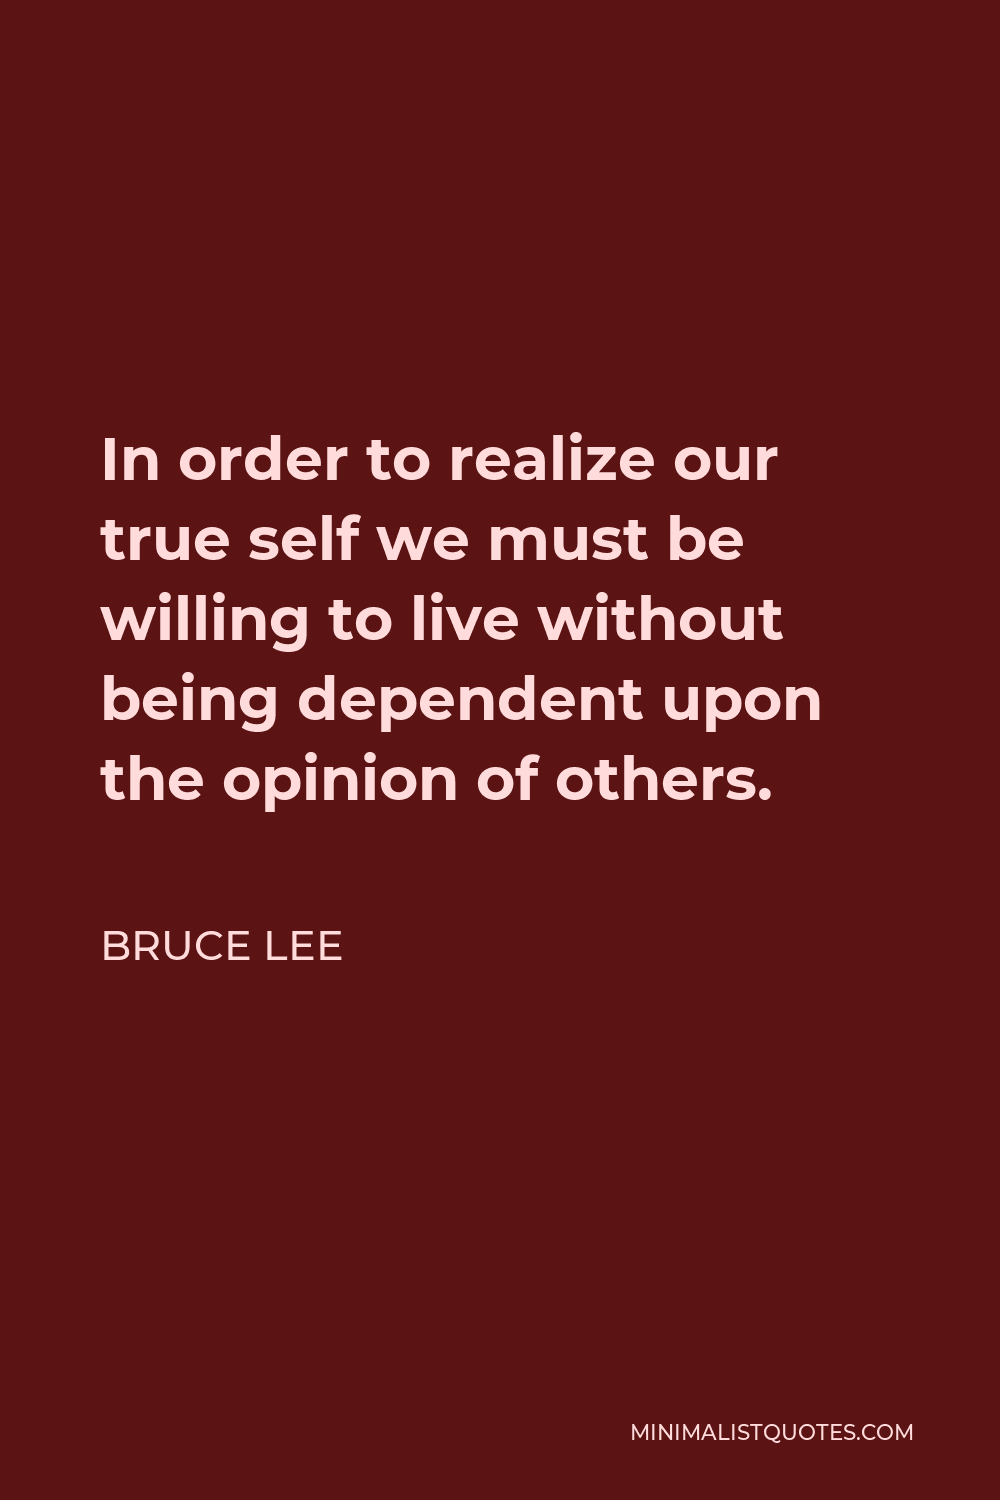 Bruce Lee Quote - In order to realize our true self we must be willing to live without being dependent upon the opinion of others.